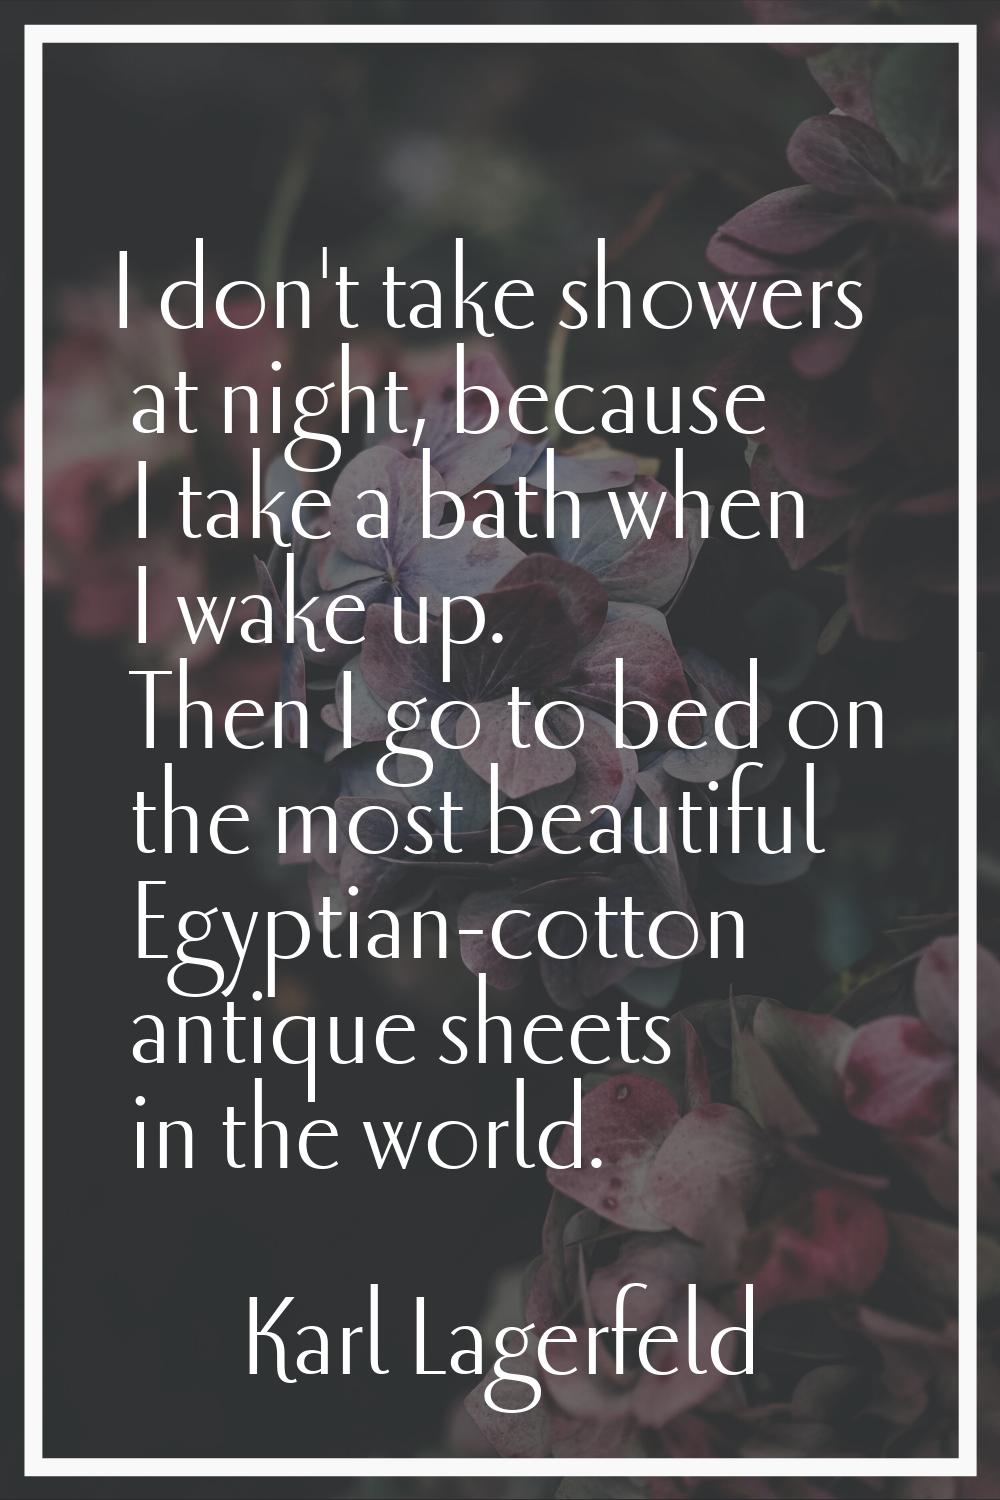 I don't take showers at night, because I take a bath when I wake up. Then I go to bed on the most b